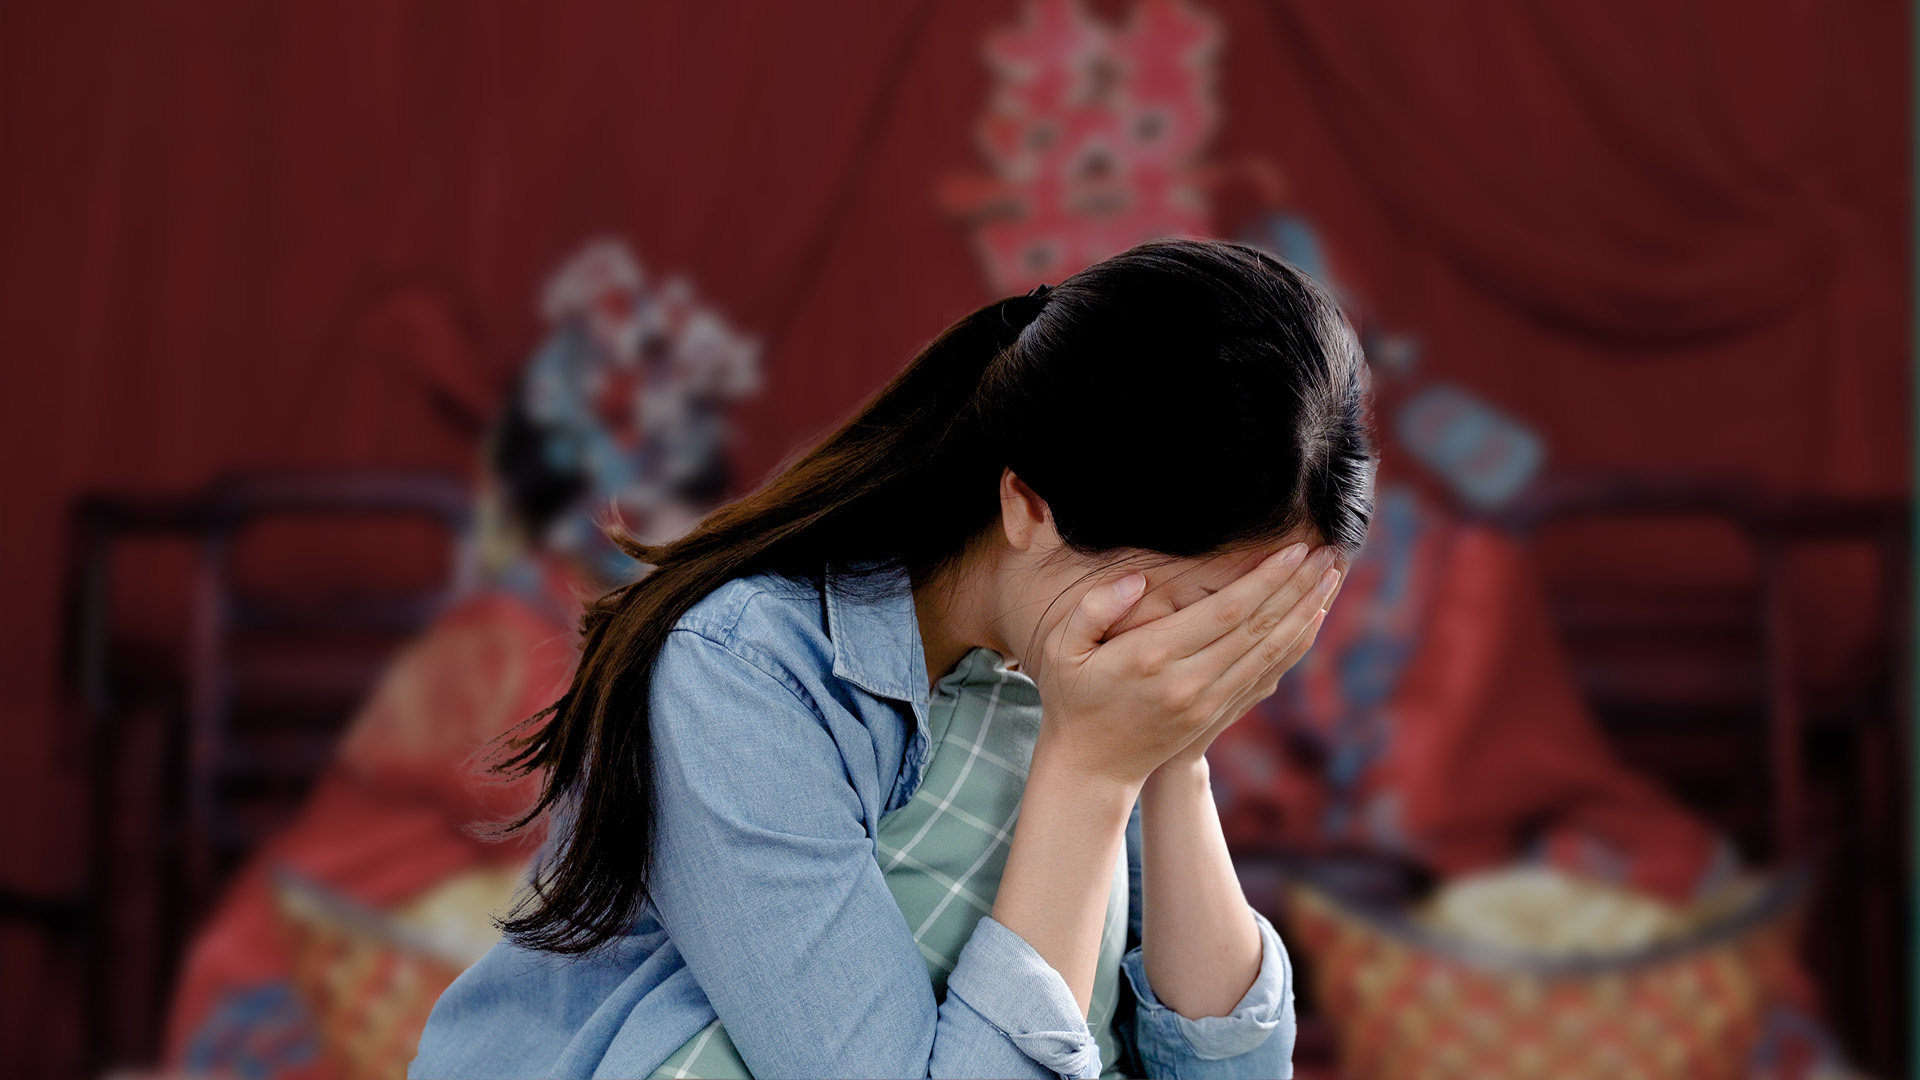 A woman in China felt so pressured by her parents constant demands she get married she developed anxiety disorder and breathing problems. Photo: Handout